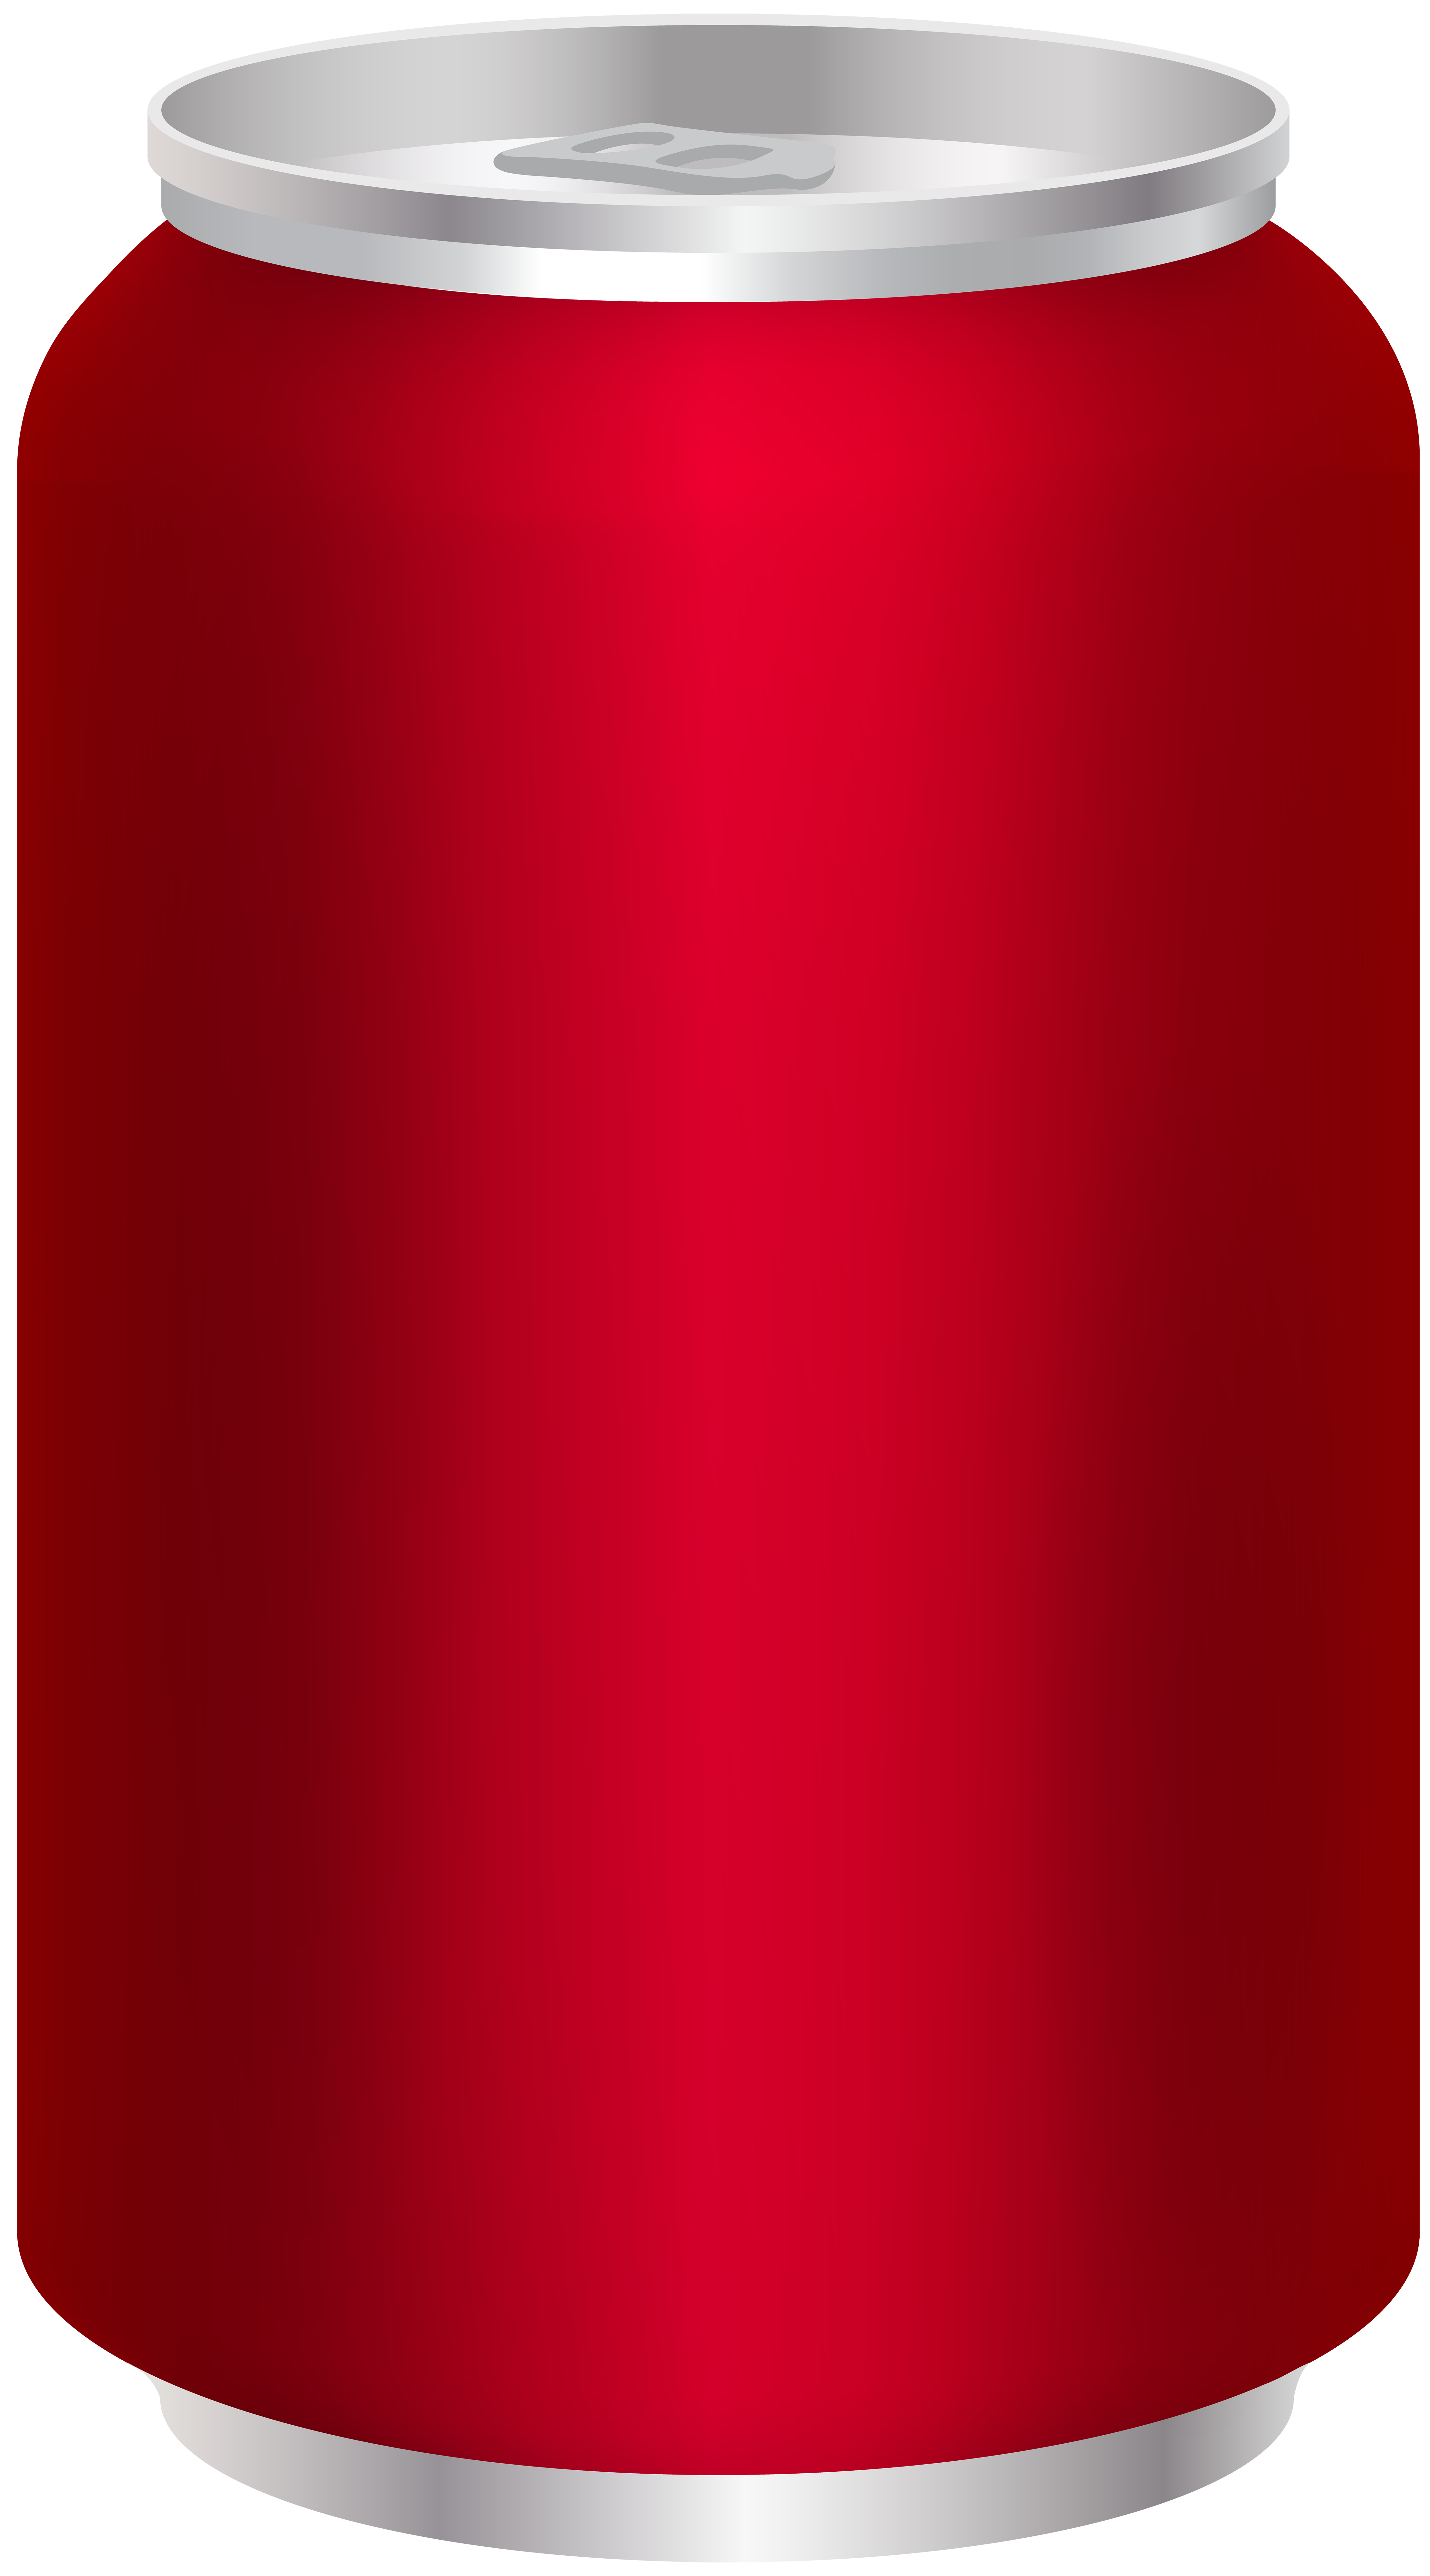 Soda can red.